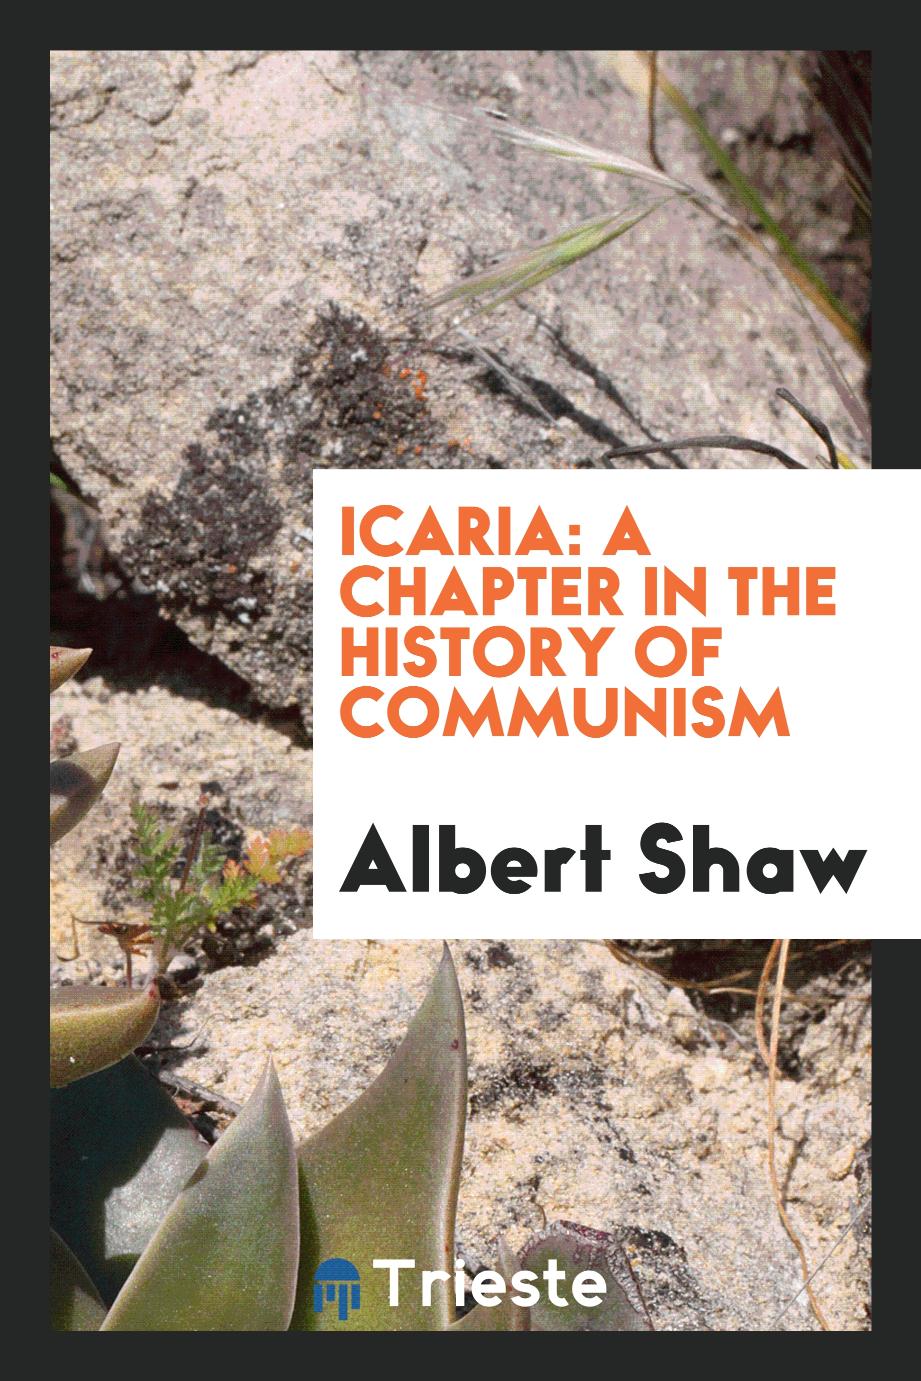 Icaria: a chapter in the history of communism